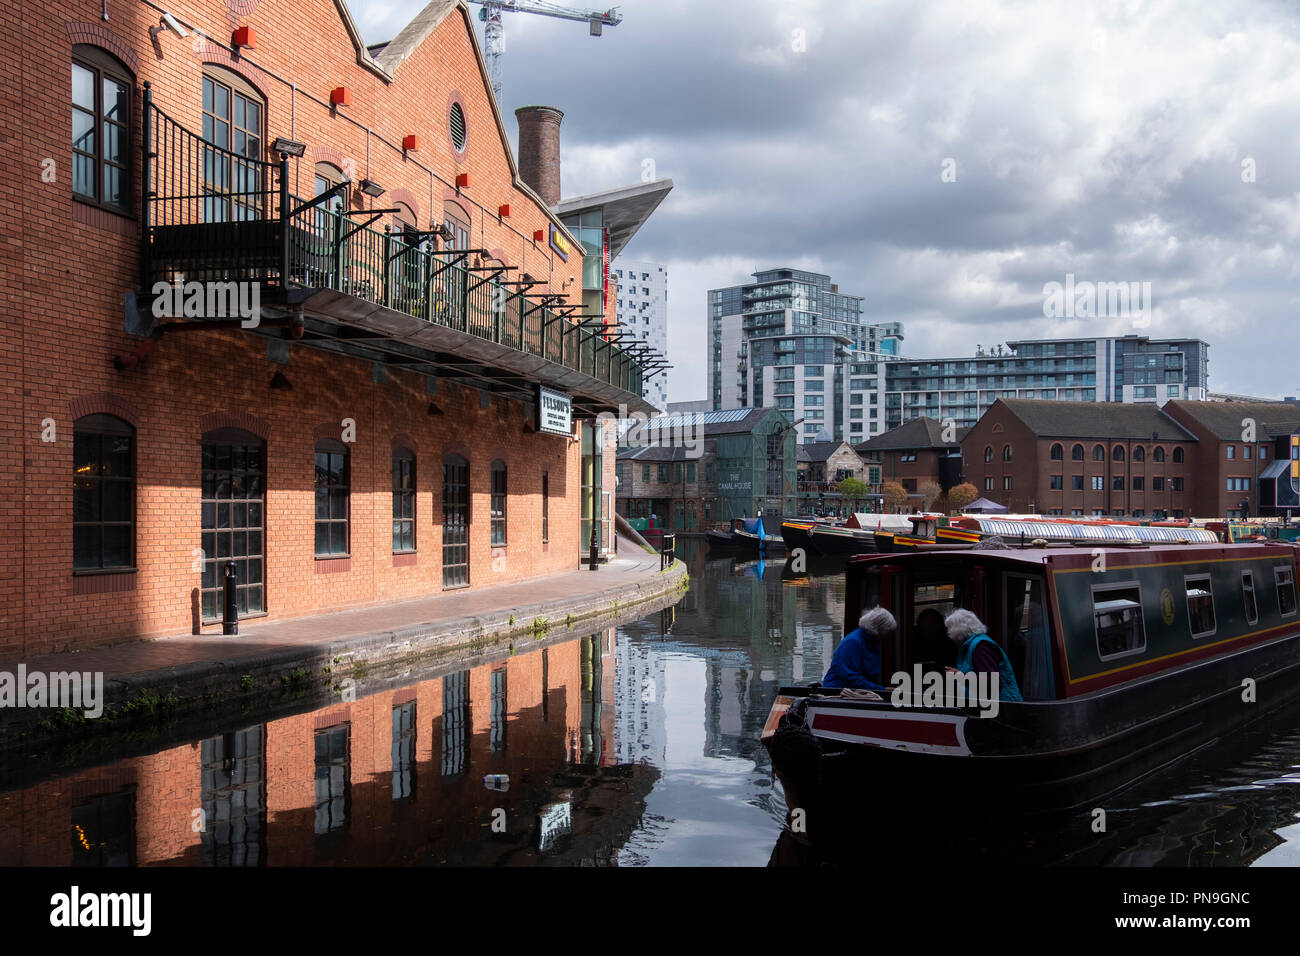 Gas Street Basin canals in Birmingham City Centre, England Stock Photo